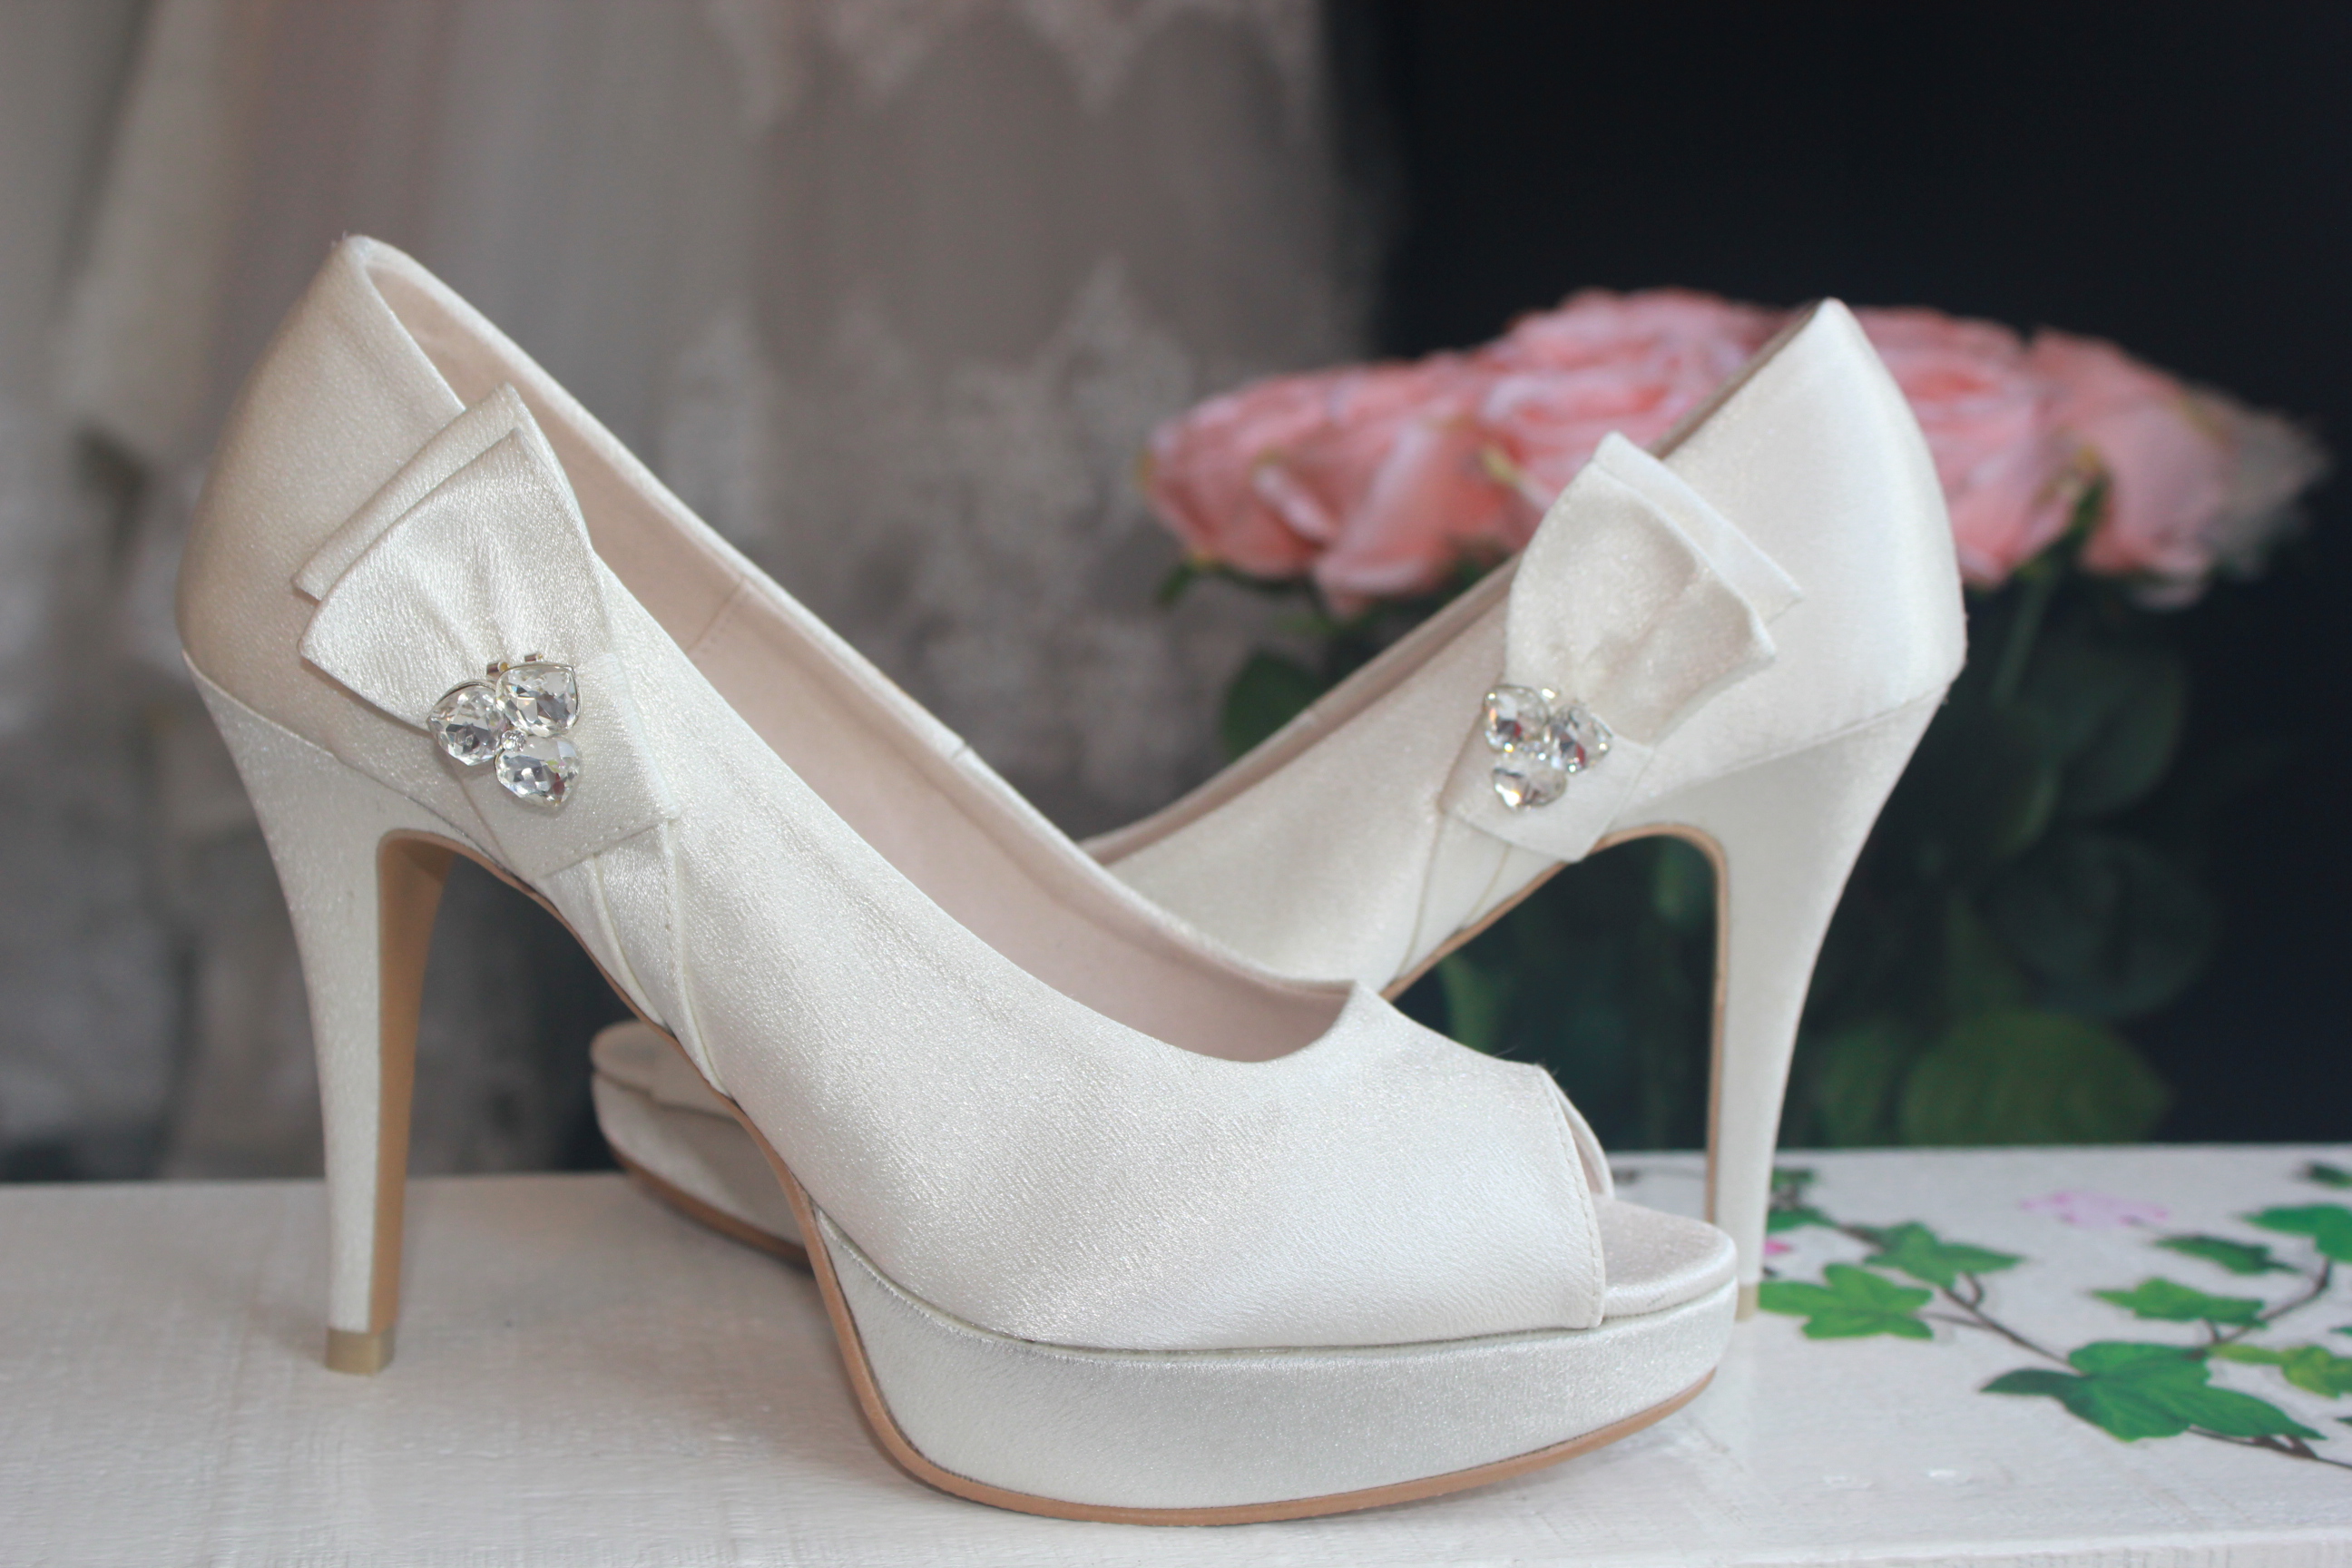 4 Inches Peep Toe Pump With Side Bow